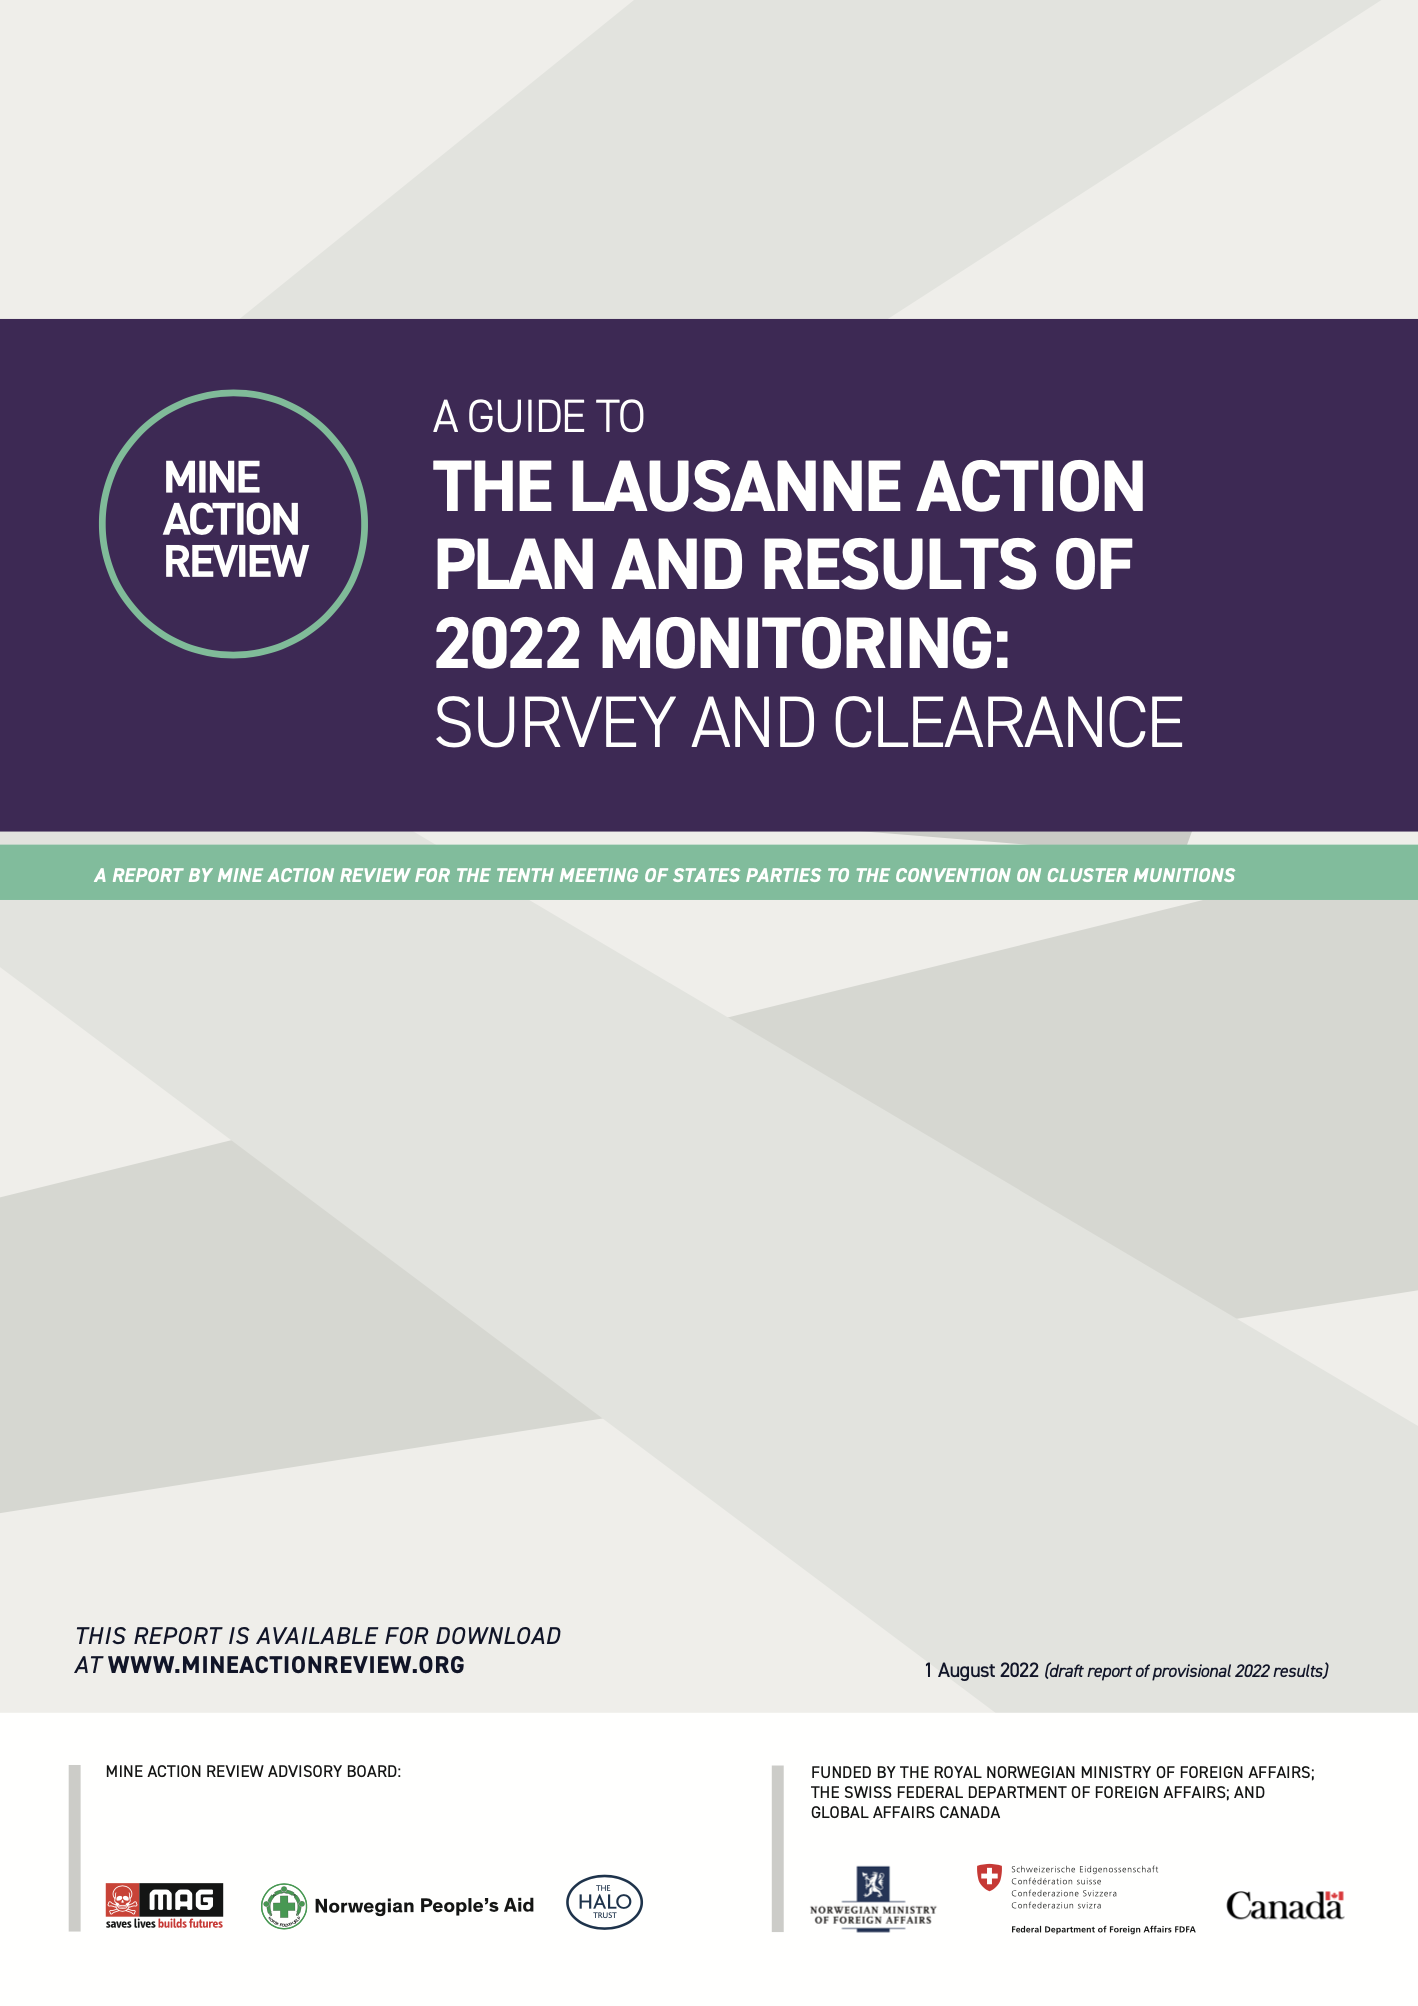 Guide to the Lausanne Action Plan and Provisional Results of the 2022 Monitoring